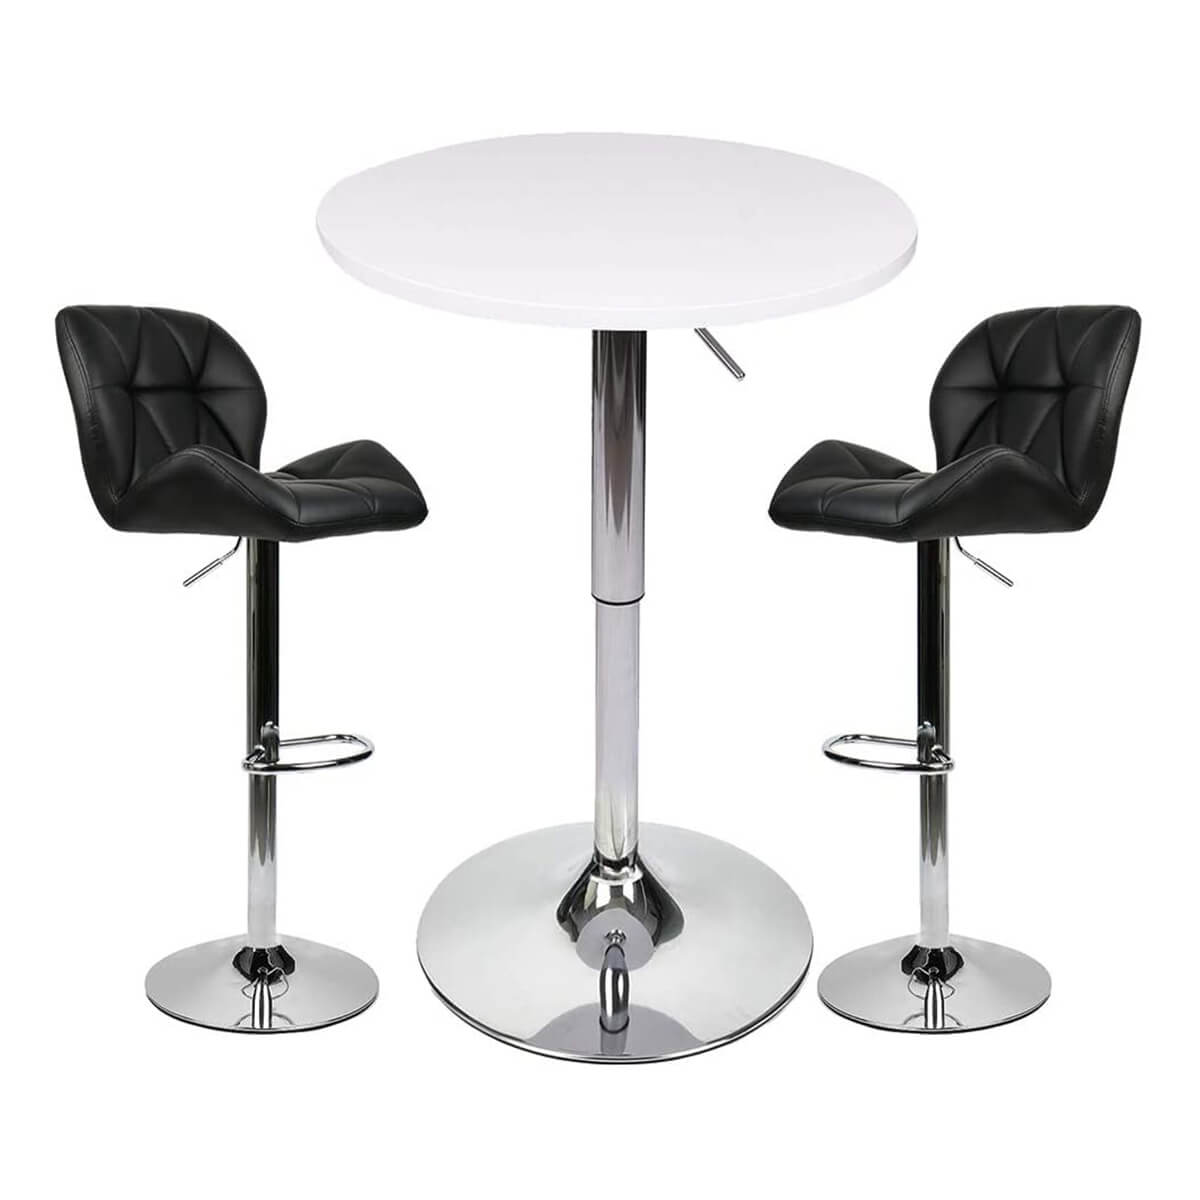 Elecwish Bar Table Set 3-Piece OW0301 white bar table with black bar stools